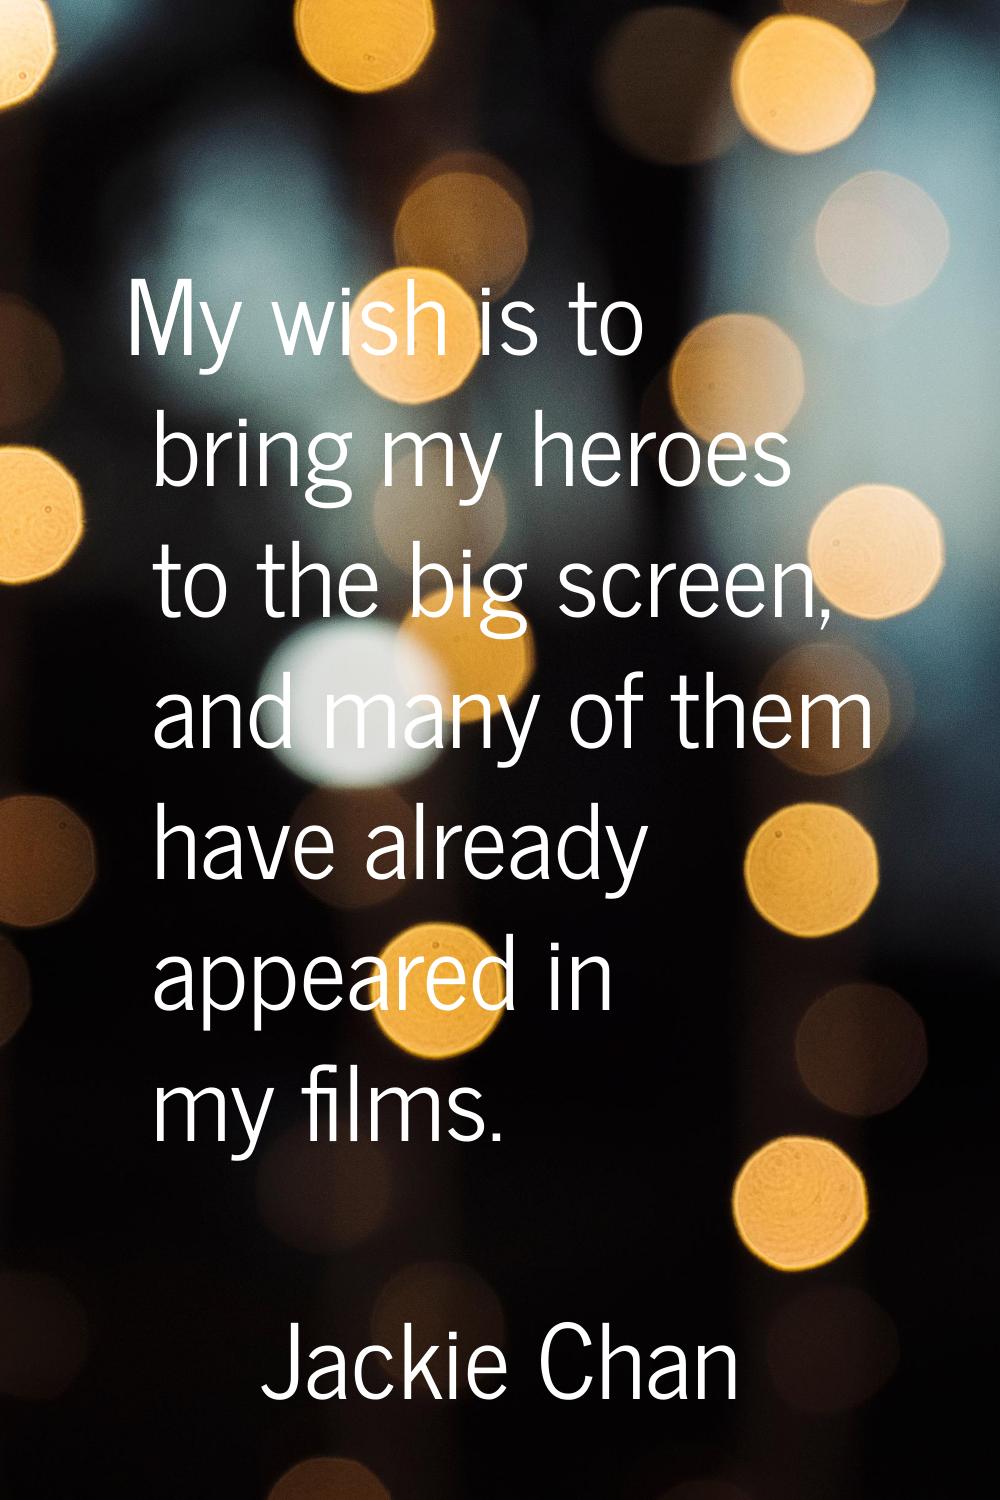 My wish is to bring my heroes to the big screen, and many of them have already appeared in my films